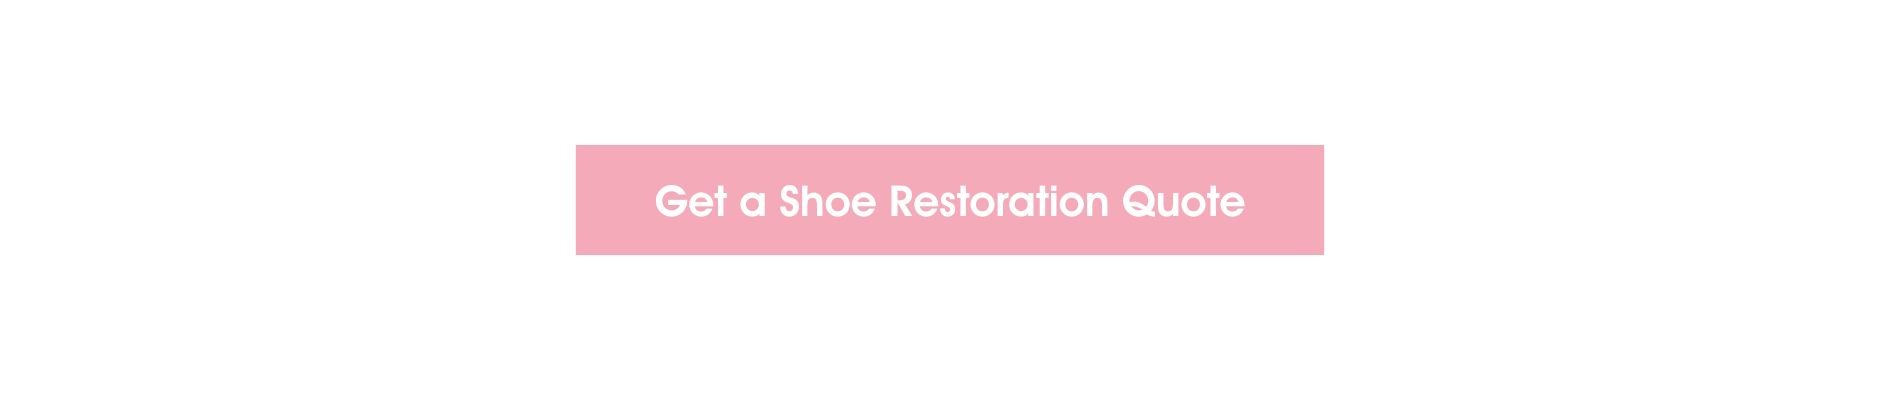 get your shoe restoration quote here